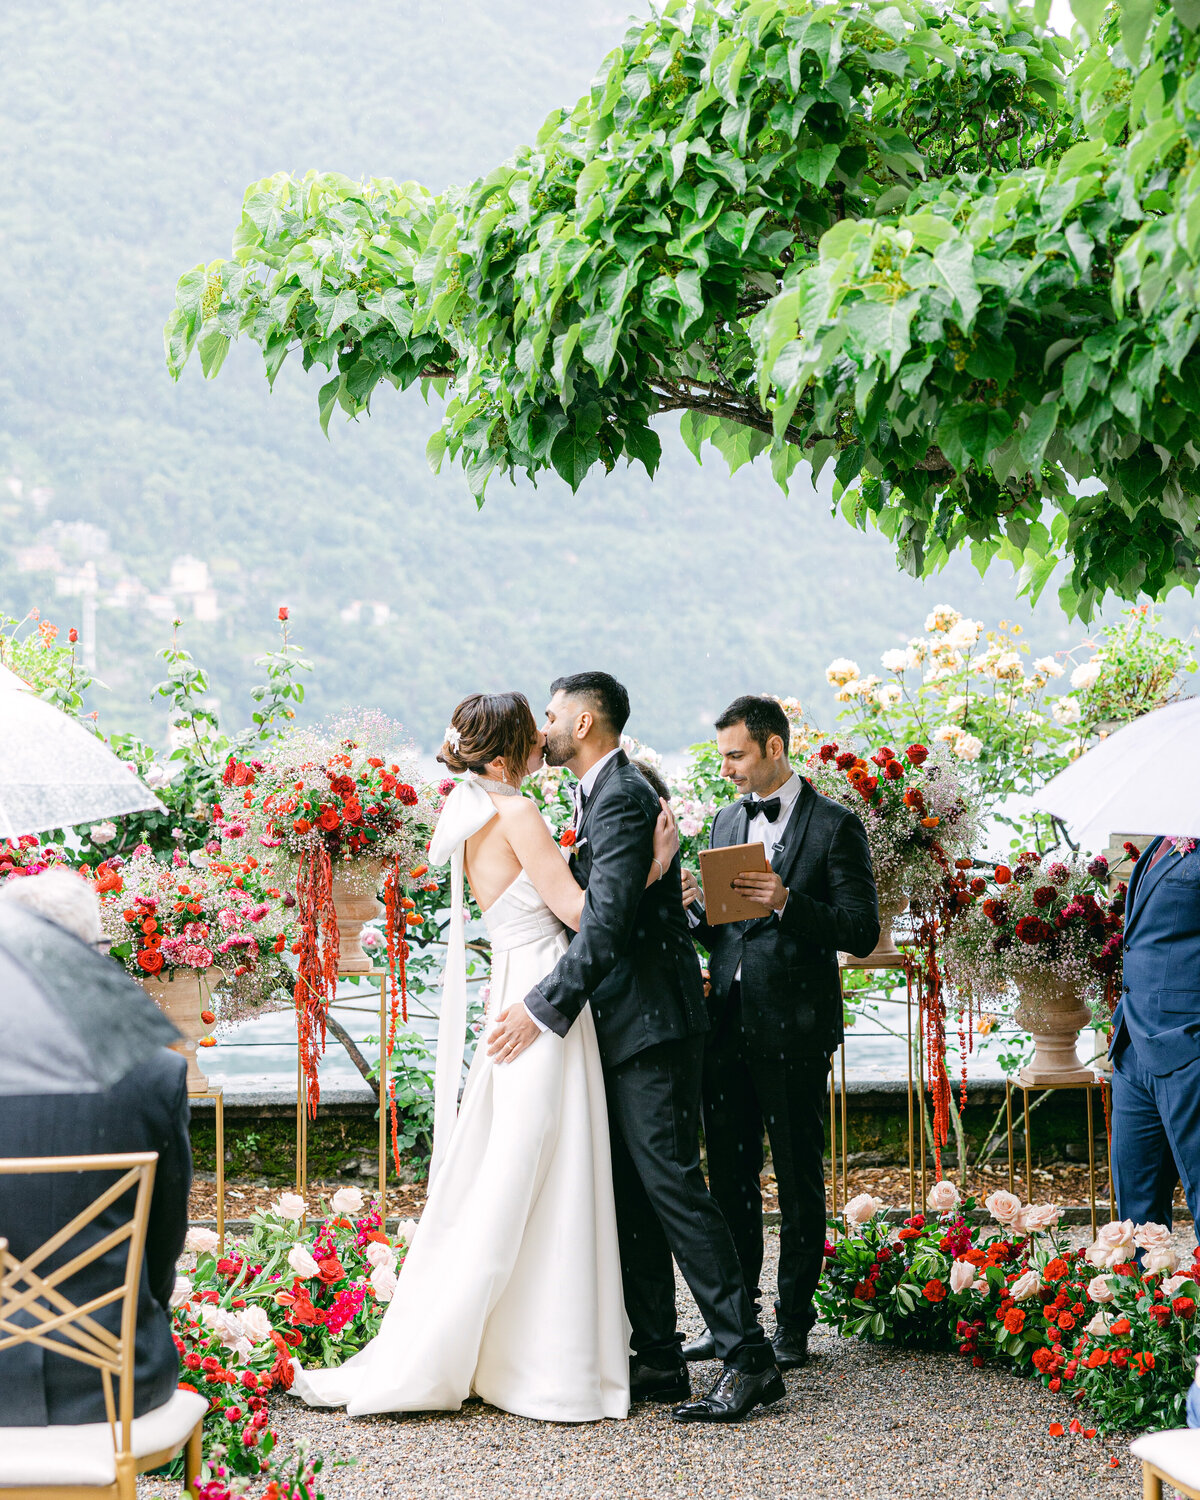 Bride and groom's first kiss with bright flowers at destination wedding on Lake Como